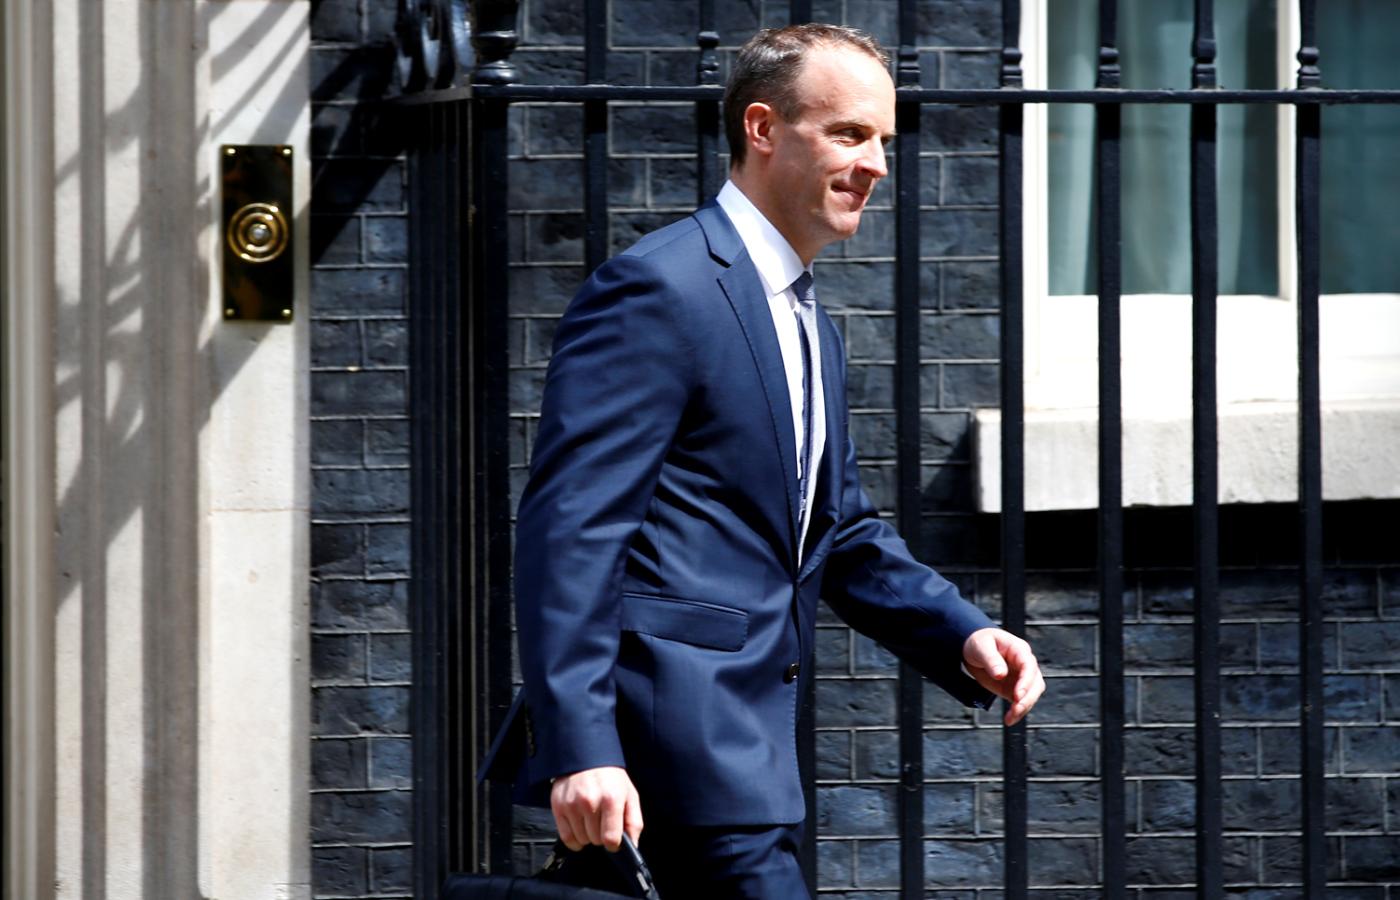 Dominic Raab, nowy minister ds. brexitu